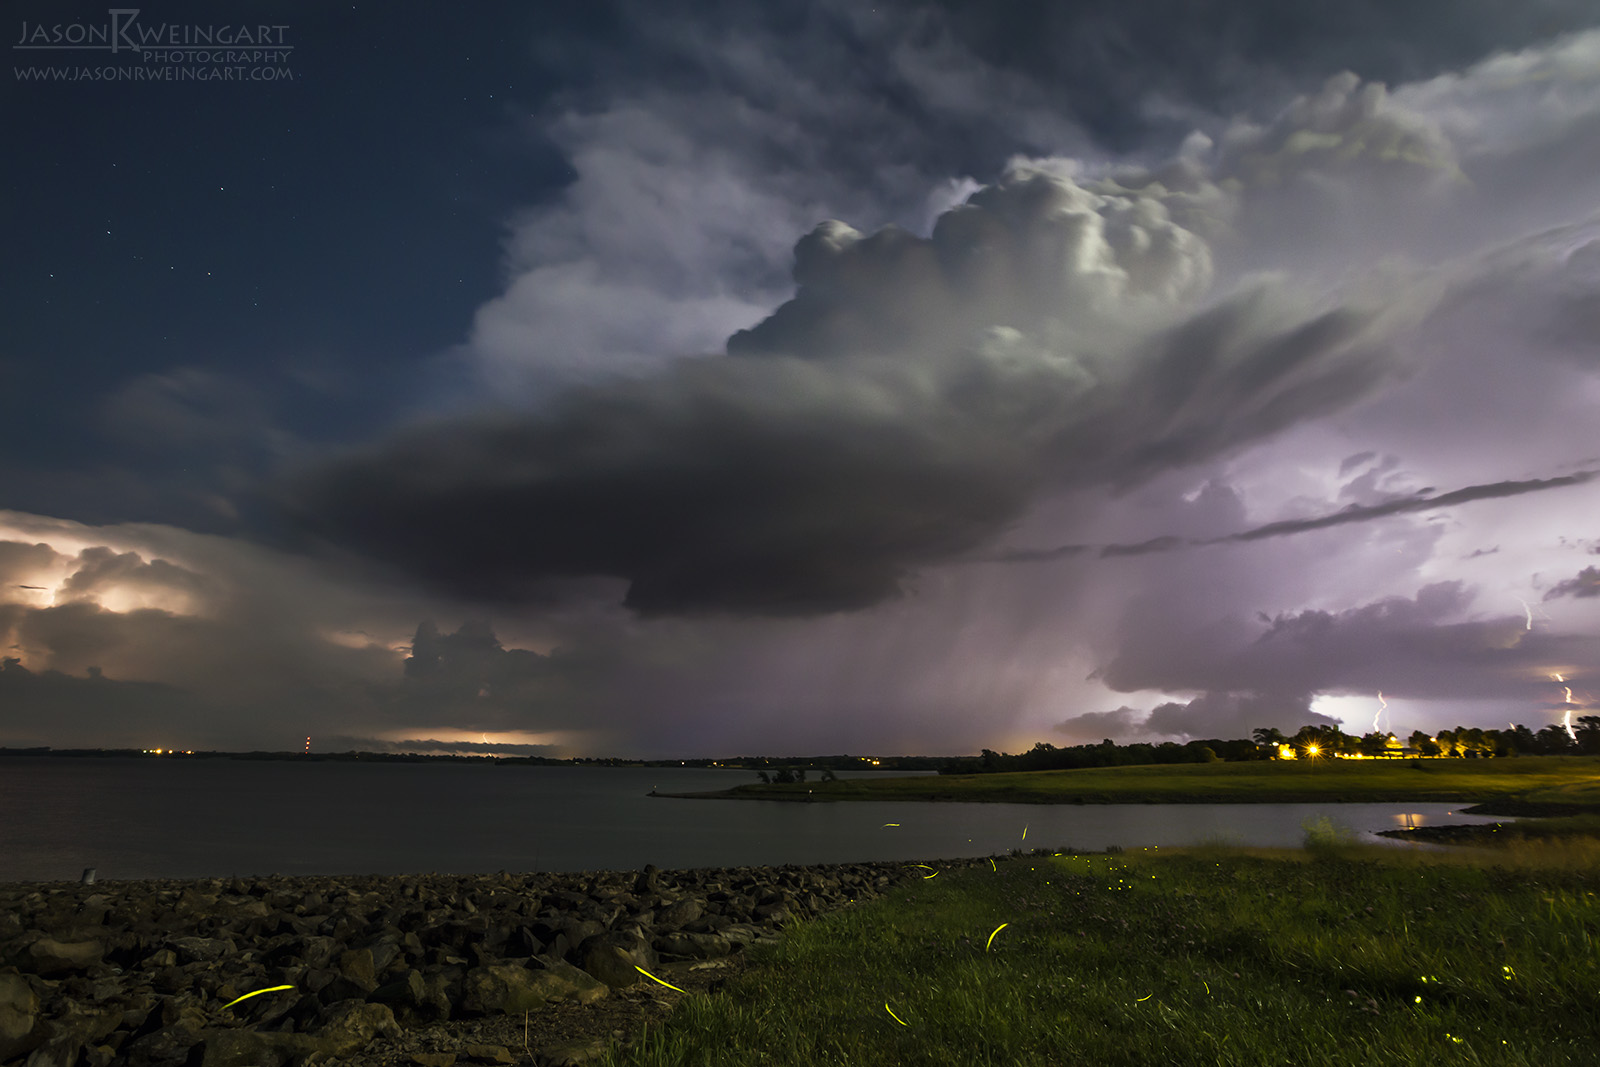  Supercell structure and fireflies over Smithville, Missouri.&nbsp; 